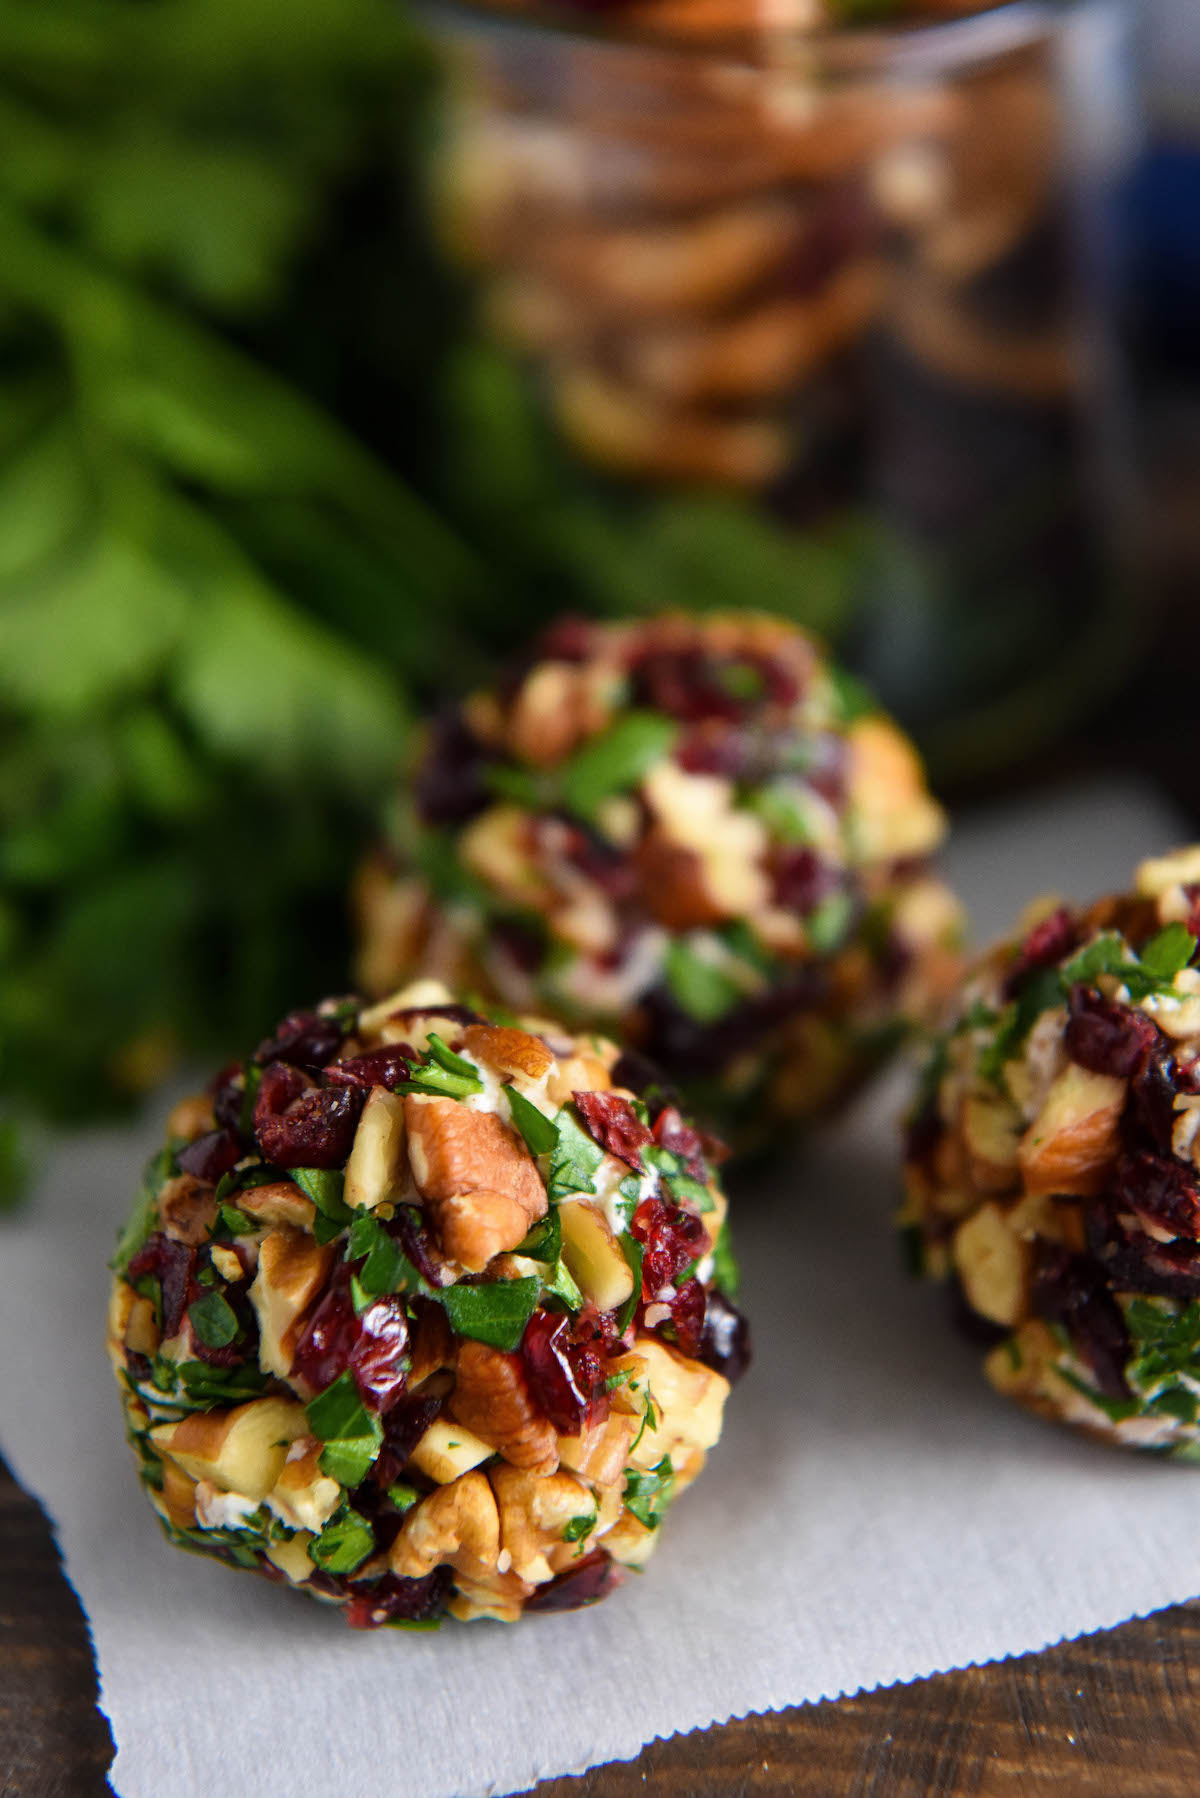 Up close image of goat cheese truffle rolled in pecans, dried cranberries and parsley.